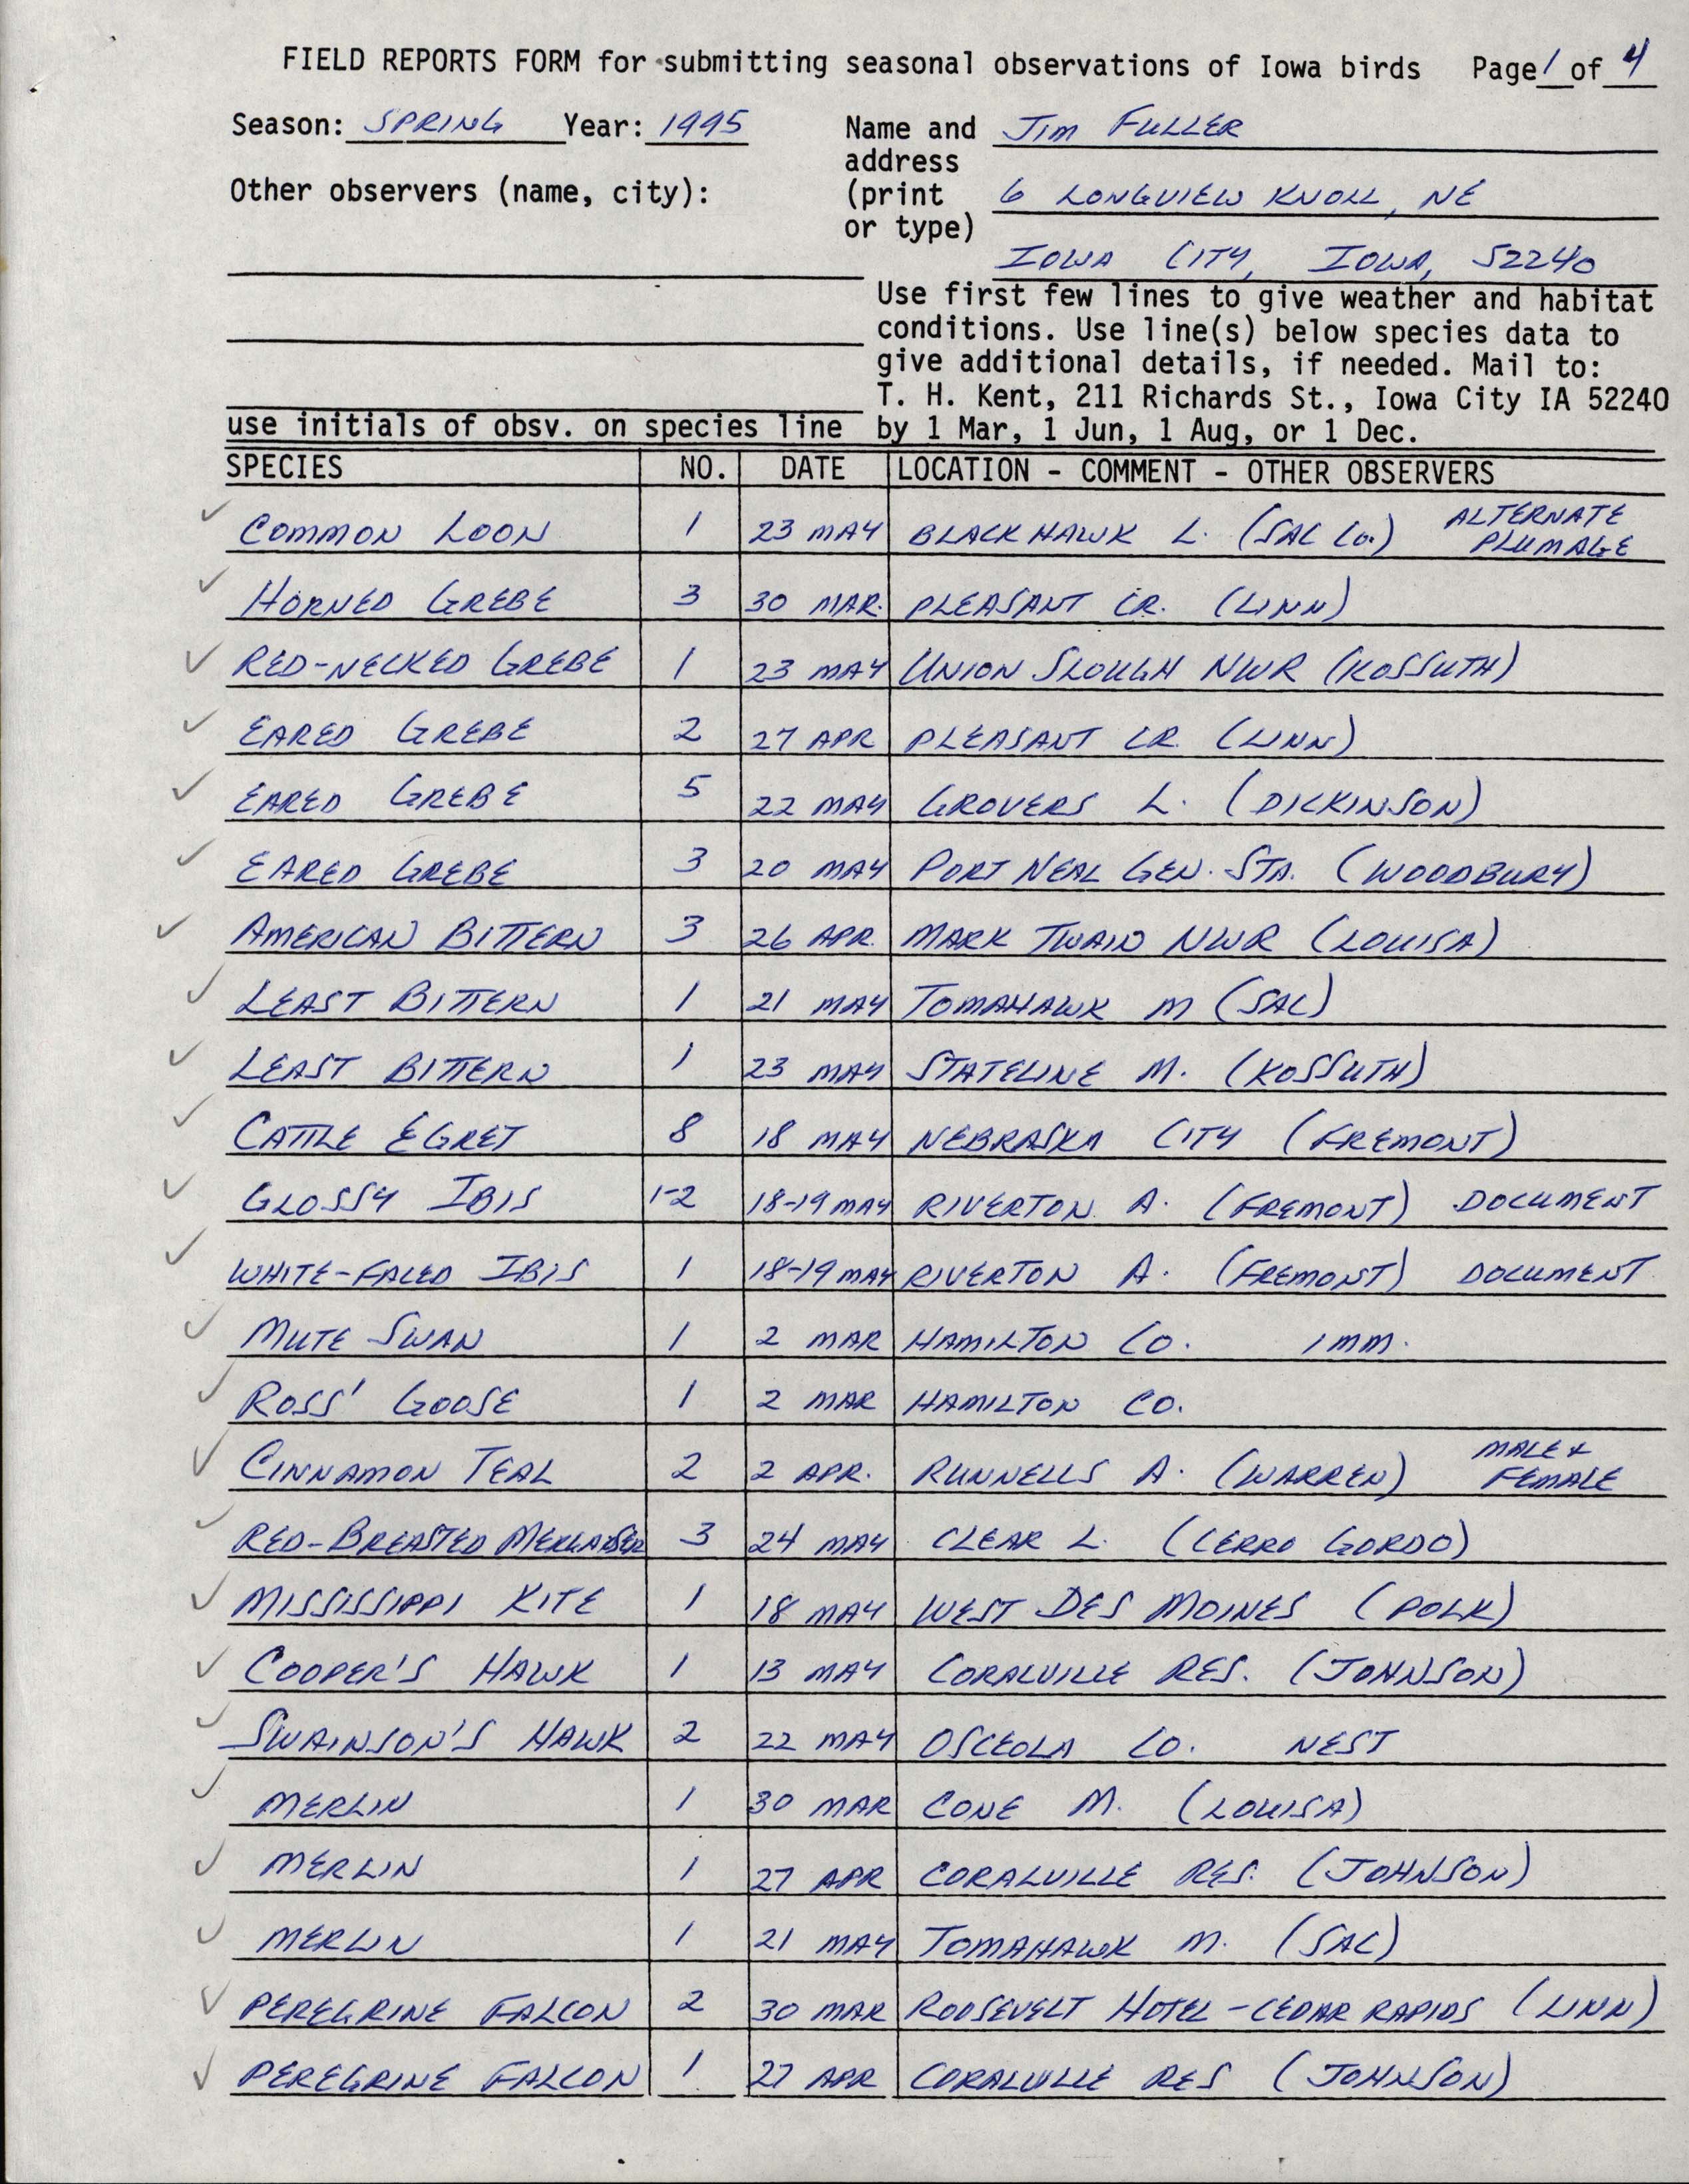 Field reports form for submitting seasonal observations of Iowa birds, spring 1995, Jim Fuller